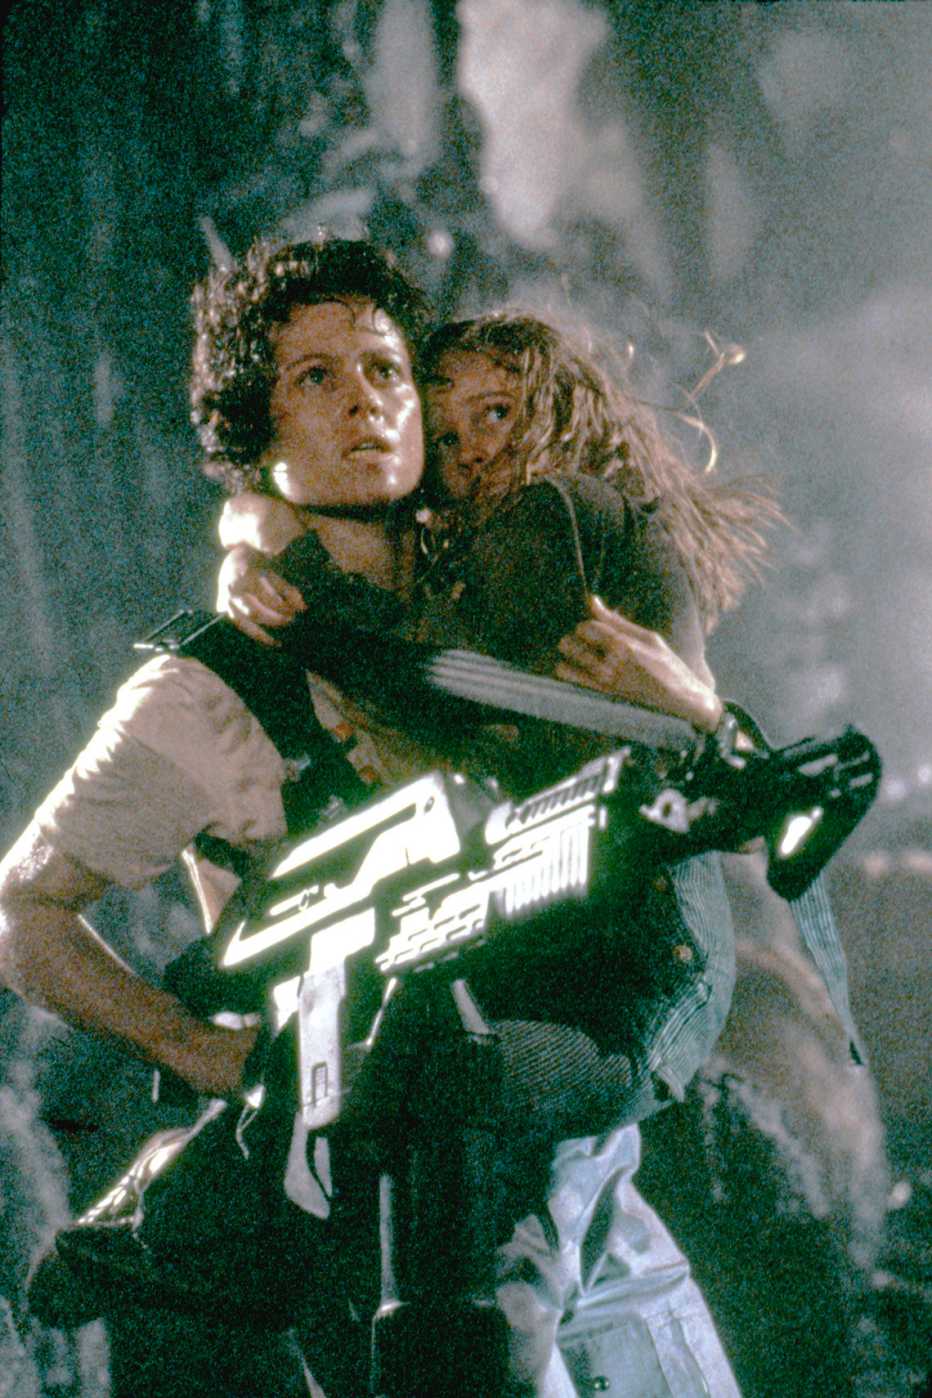 Sigourney Weaver holding an assault rifle holding Carrie Henn in her arm in the film Aliens